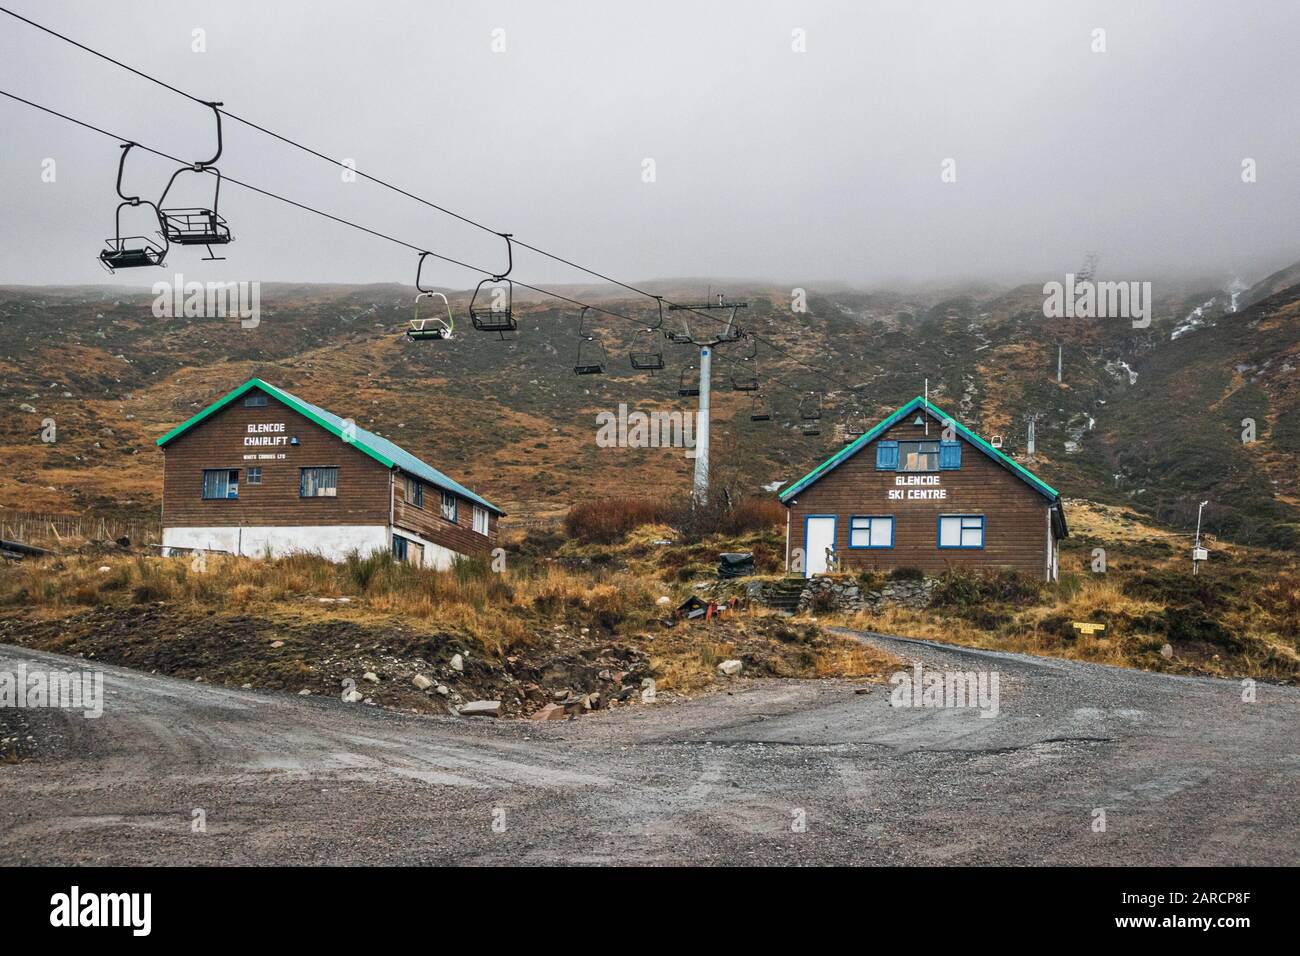 Half-empty Glen Coe ski centre on a wet, rainy day with the hills covered in dense fog. Stock Photo